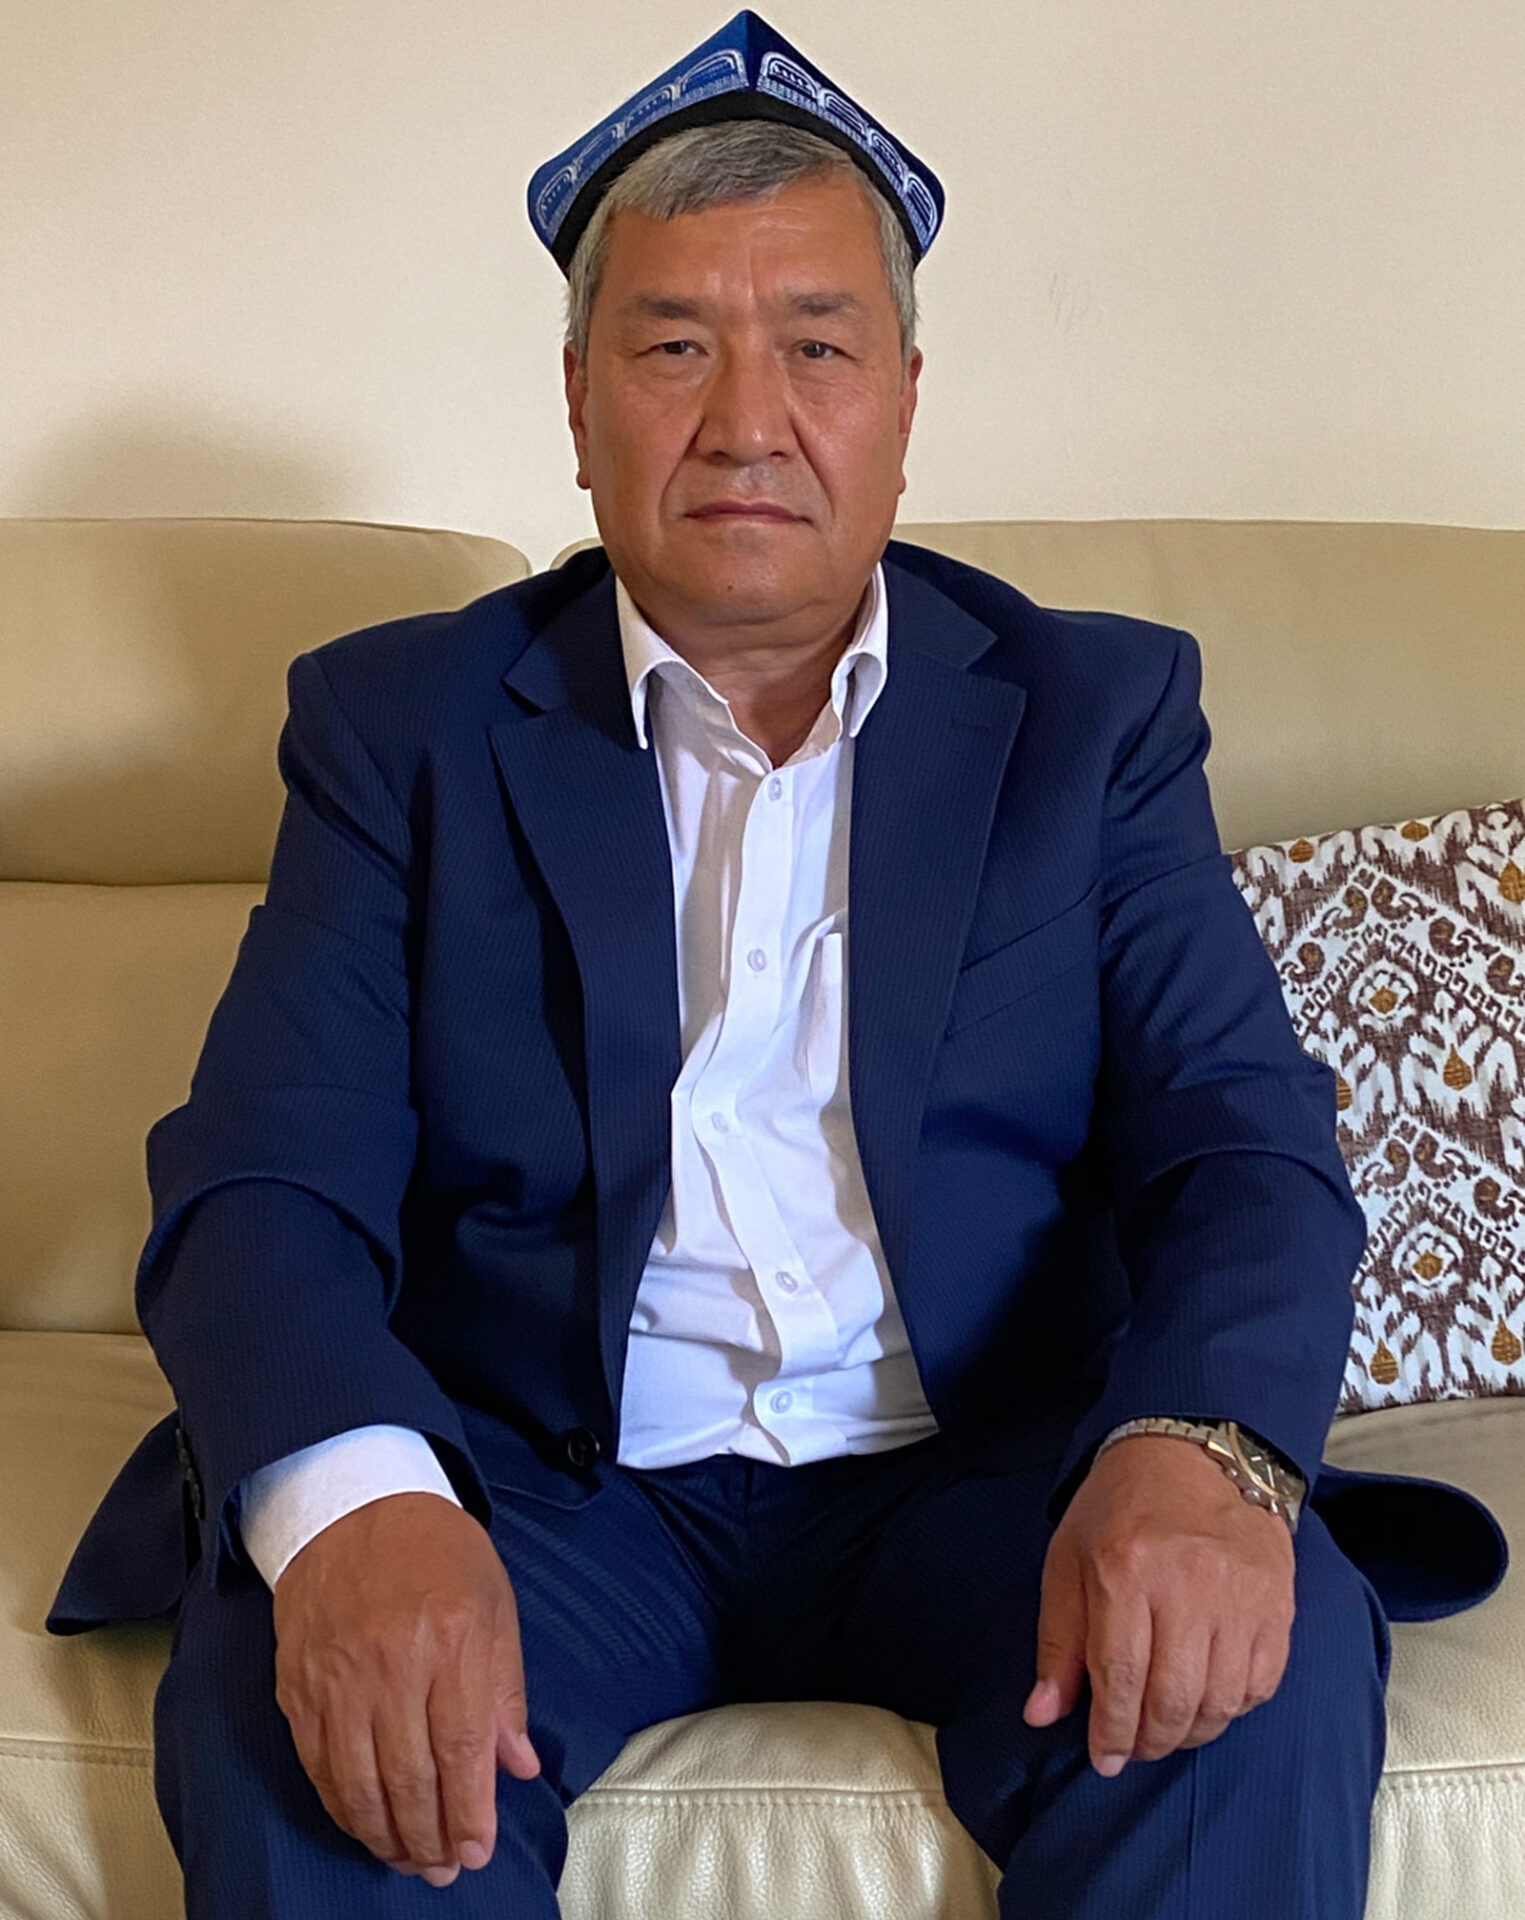 Kerim Zair, an Uyghur living in exile in London pictured at home.